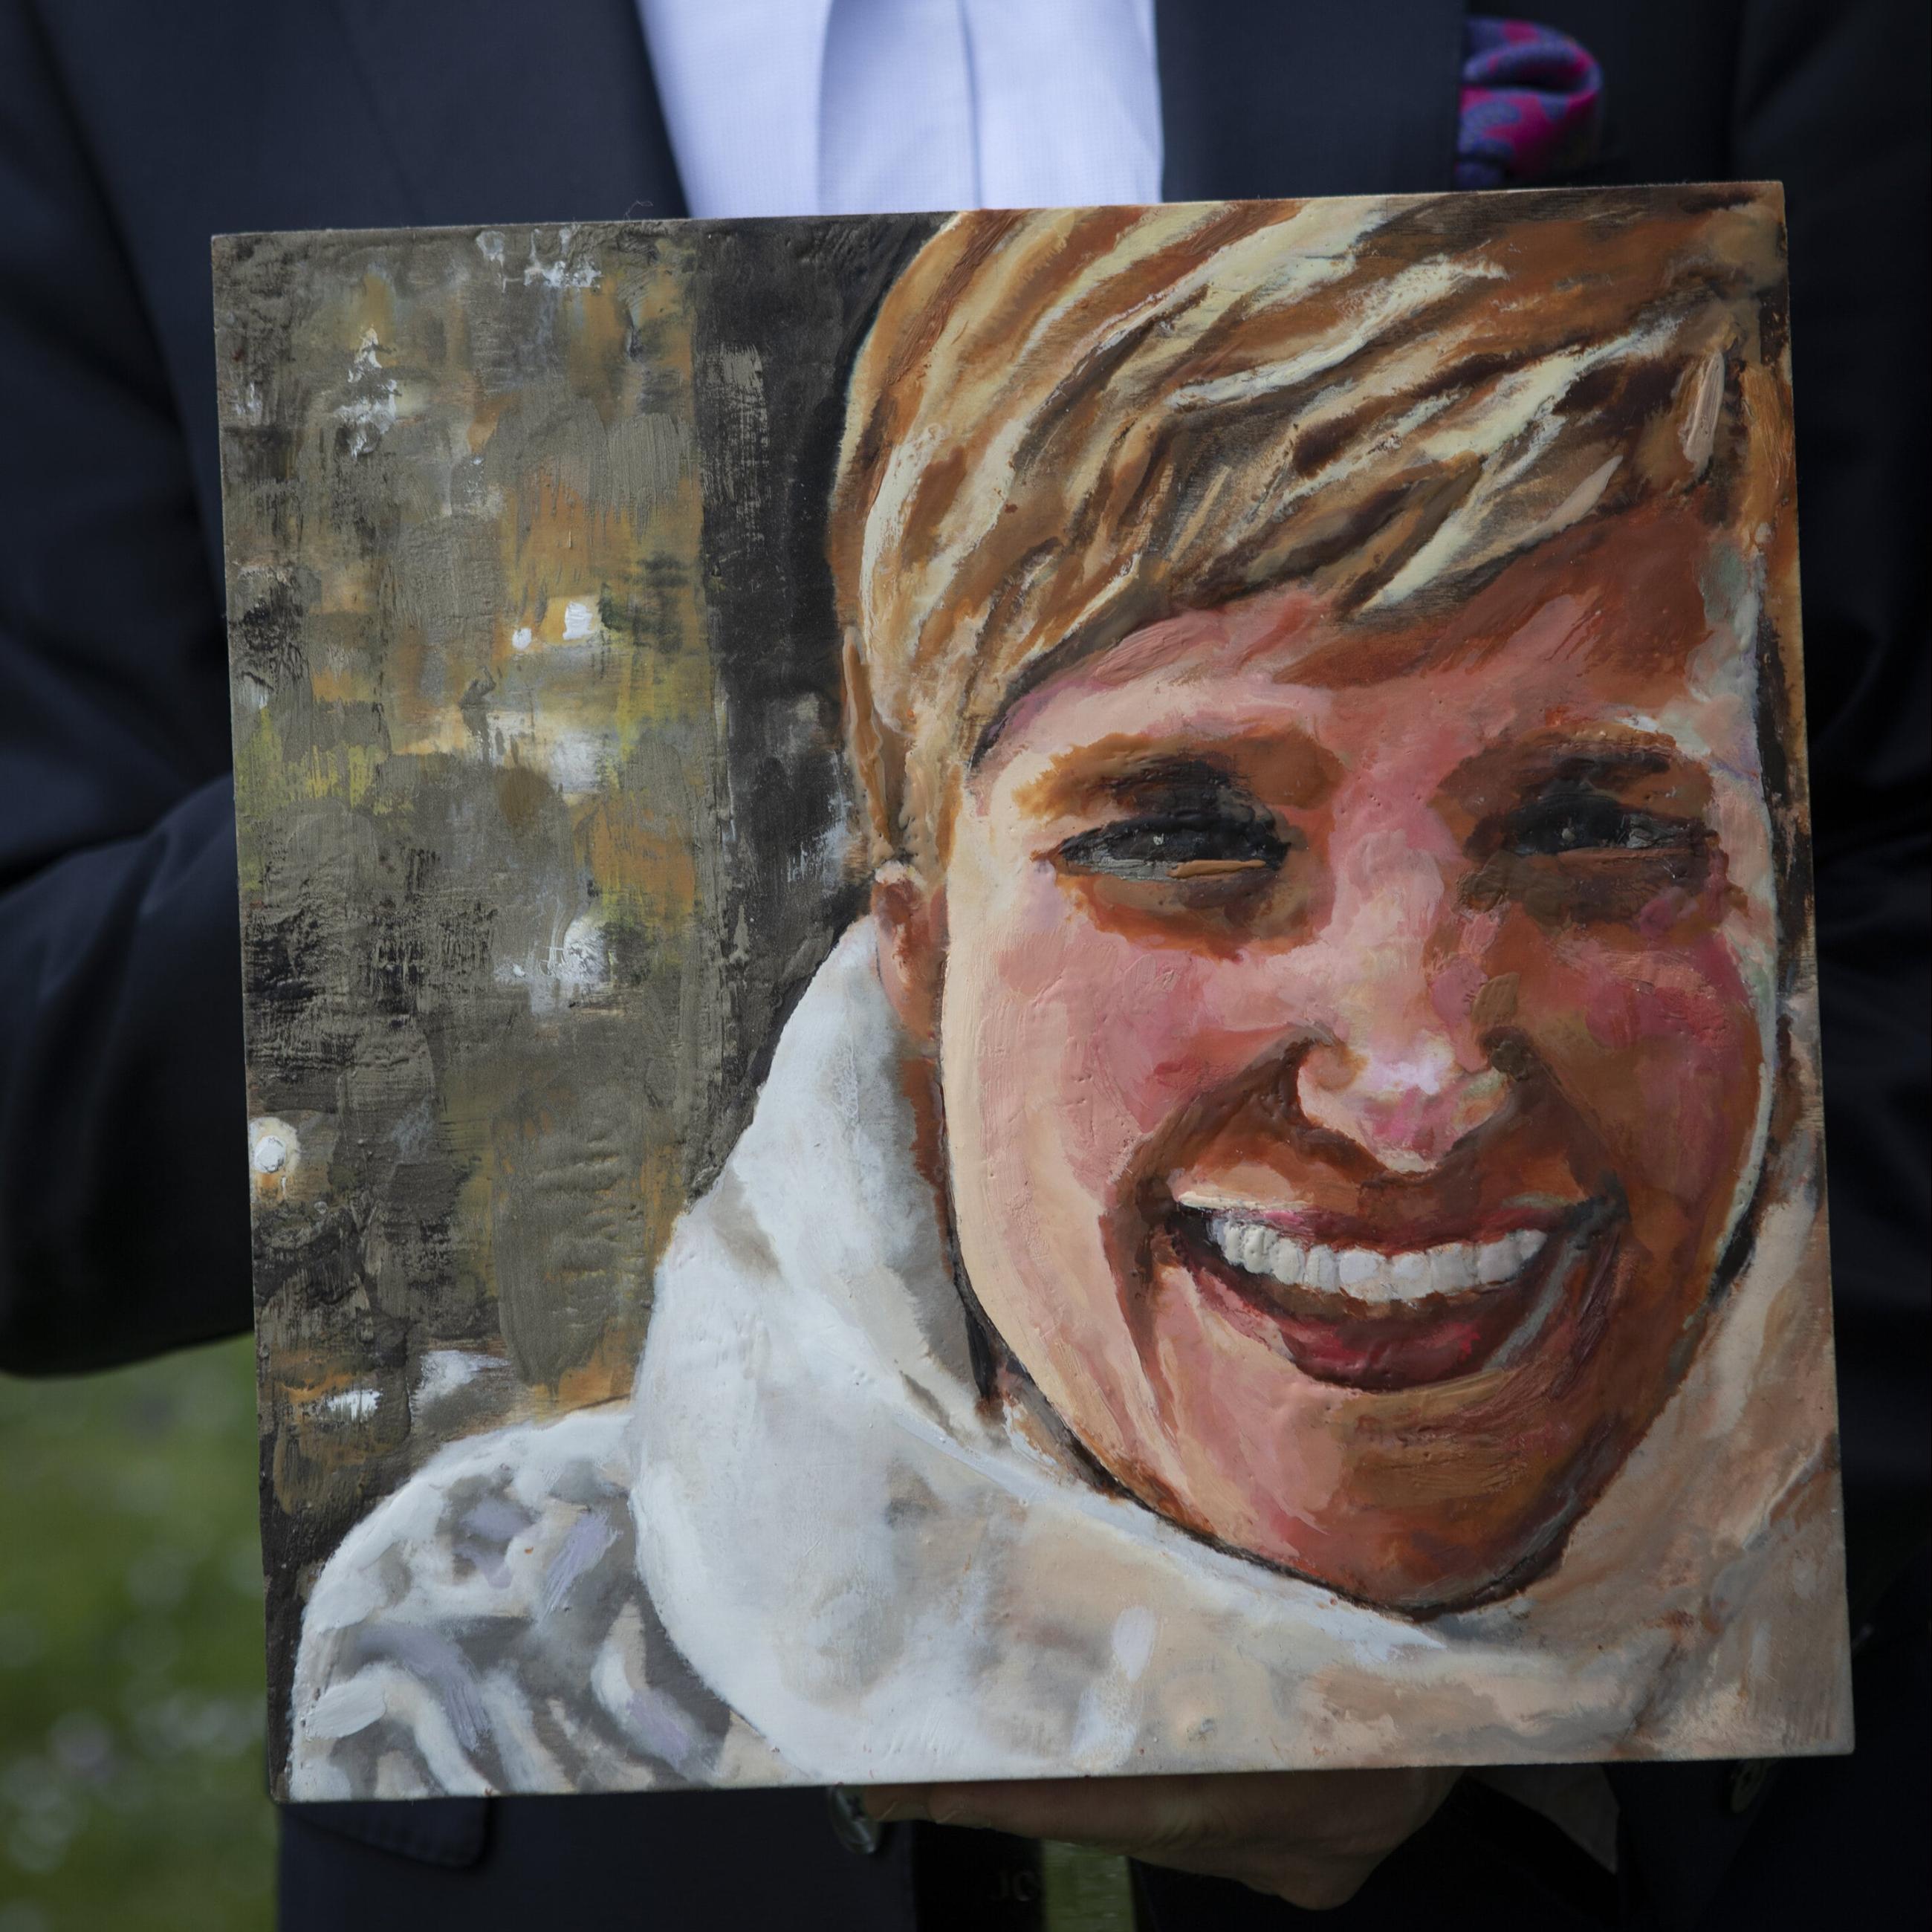  Corey Feist, cofounder of the Doctor Lorna Breen Heroes Foundation, holds a painting of his late sister-in-law at his home in Charlottesville, Virginia, on April 7, 2021.